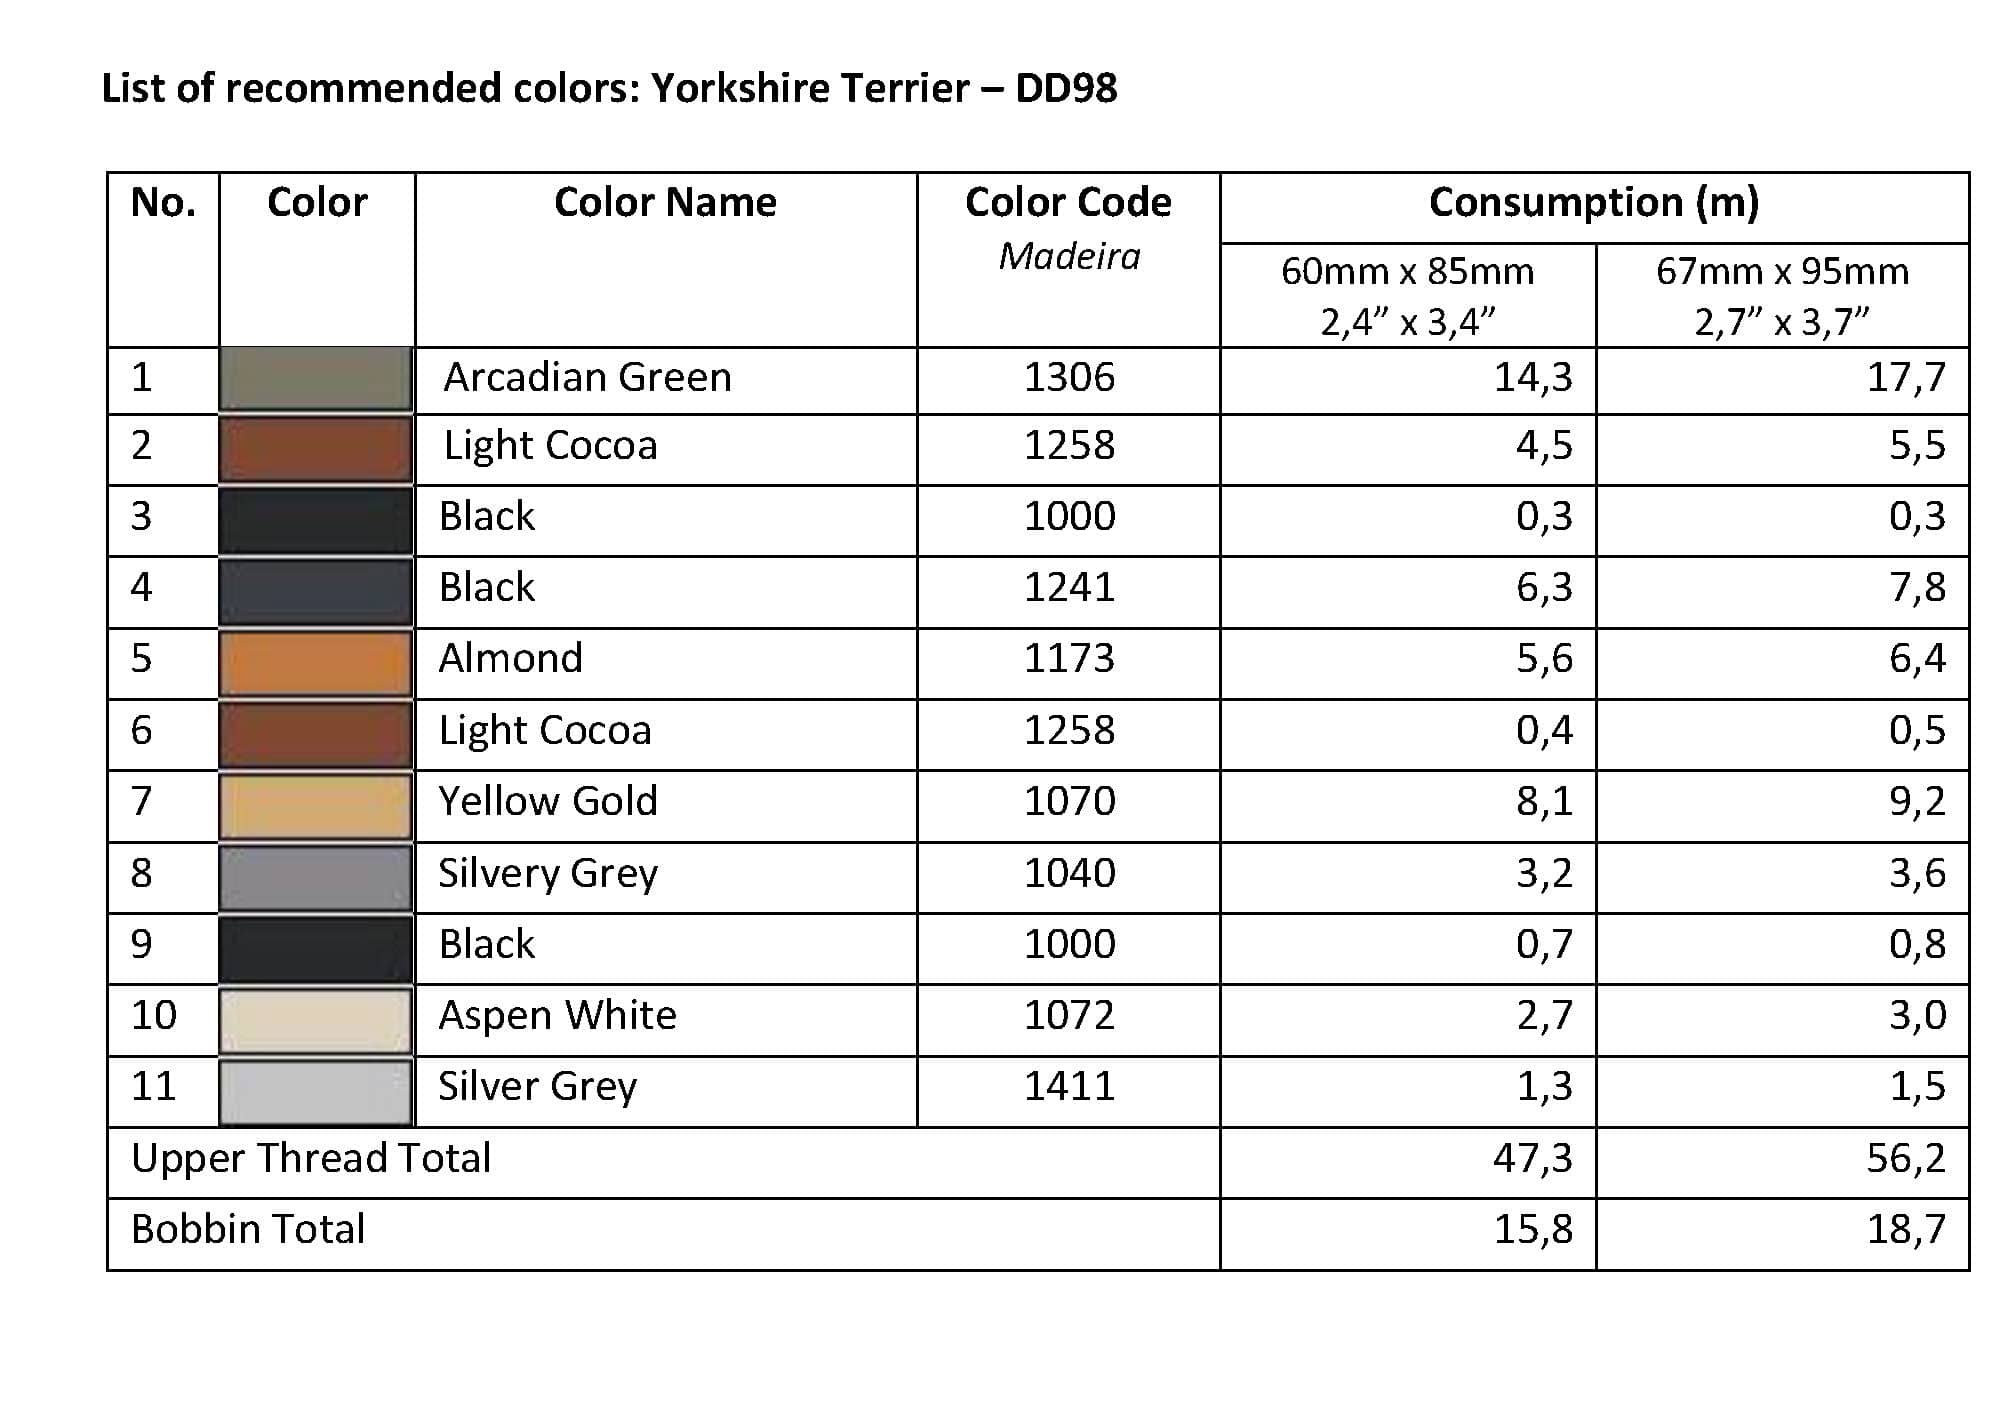 List of Recommended Colors -  Yorkshire Terrier DD98